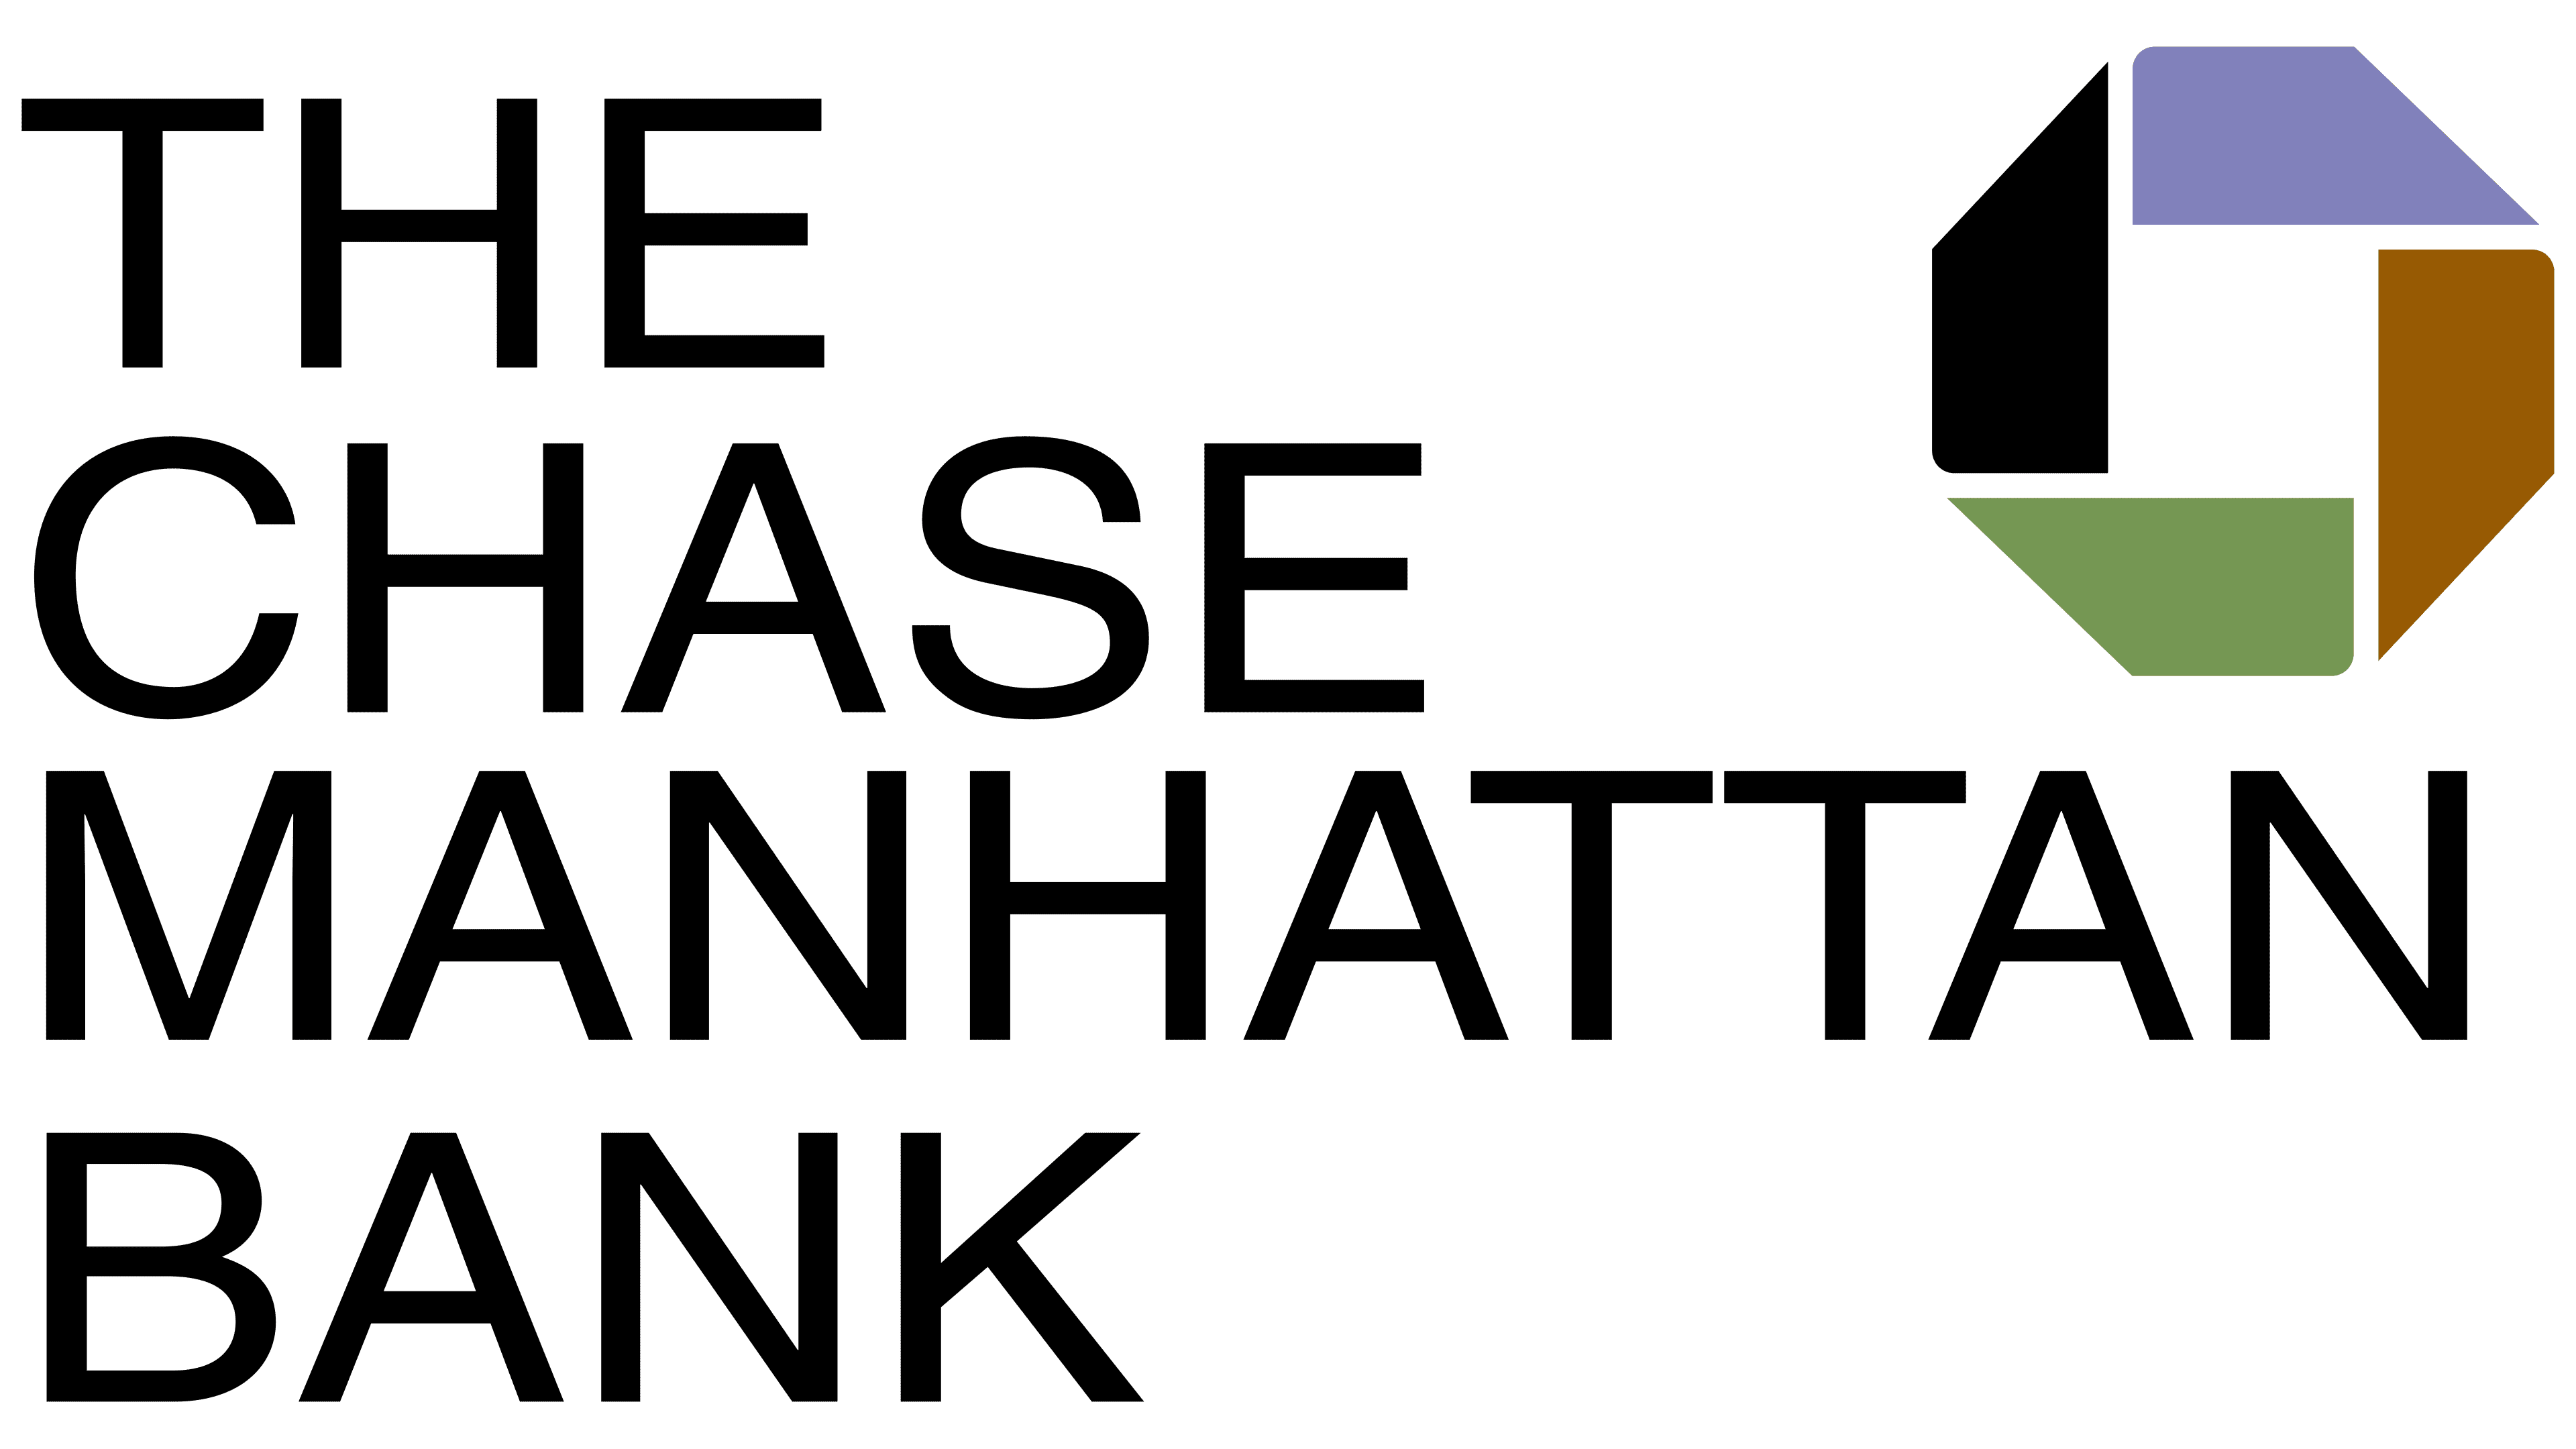 Chase Logo Symbol Meaning History Png Brand